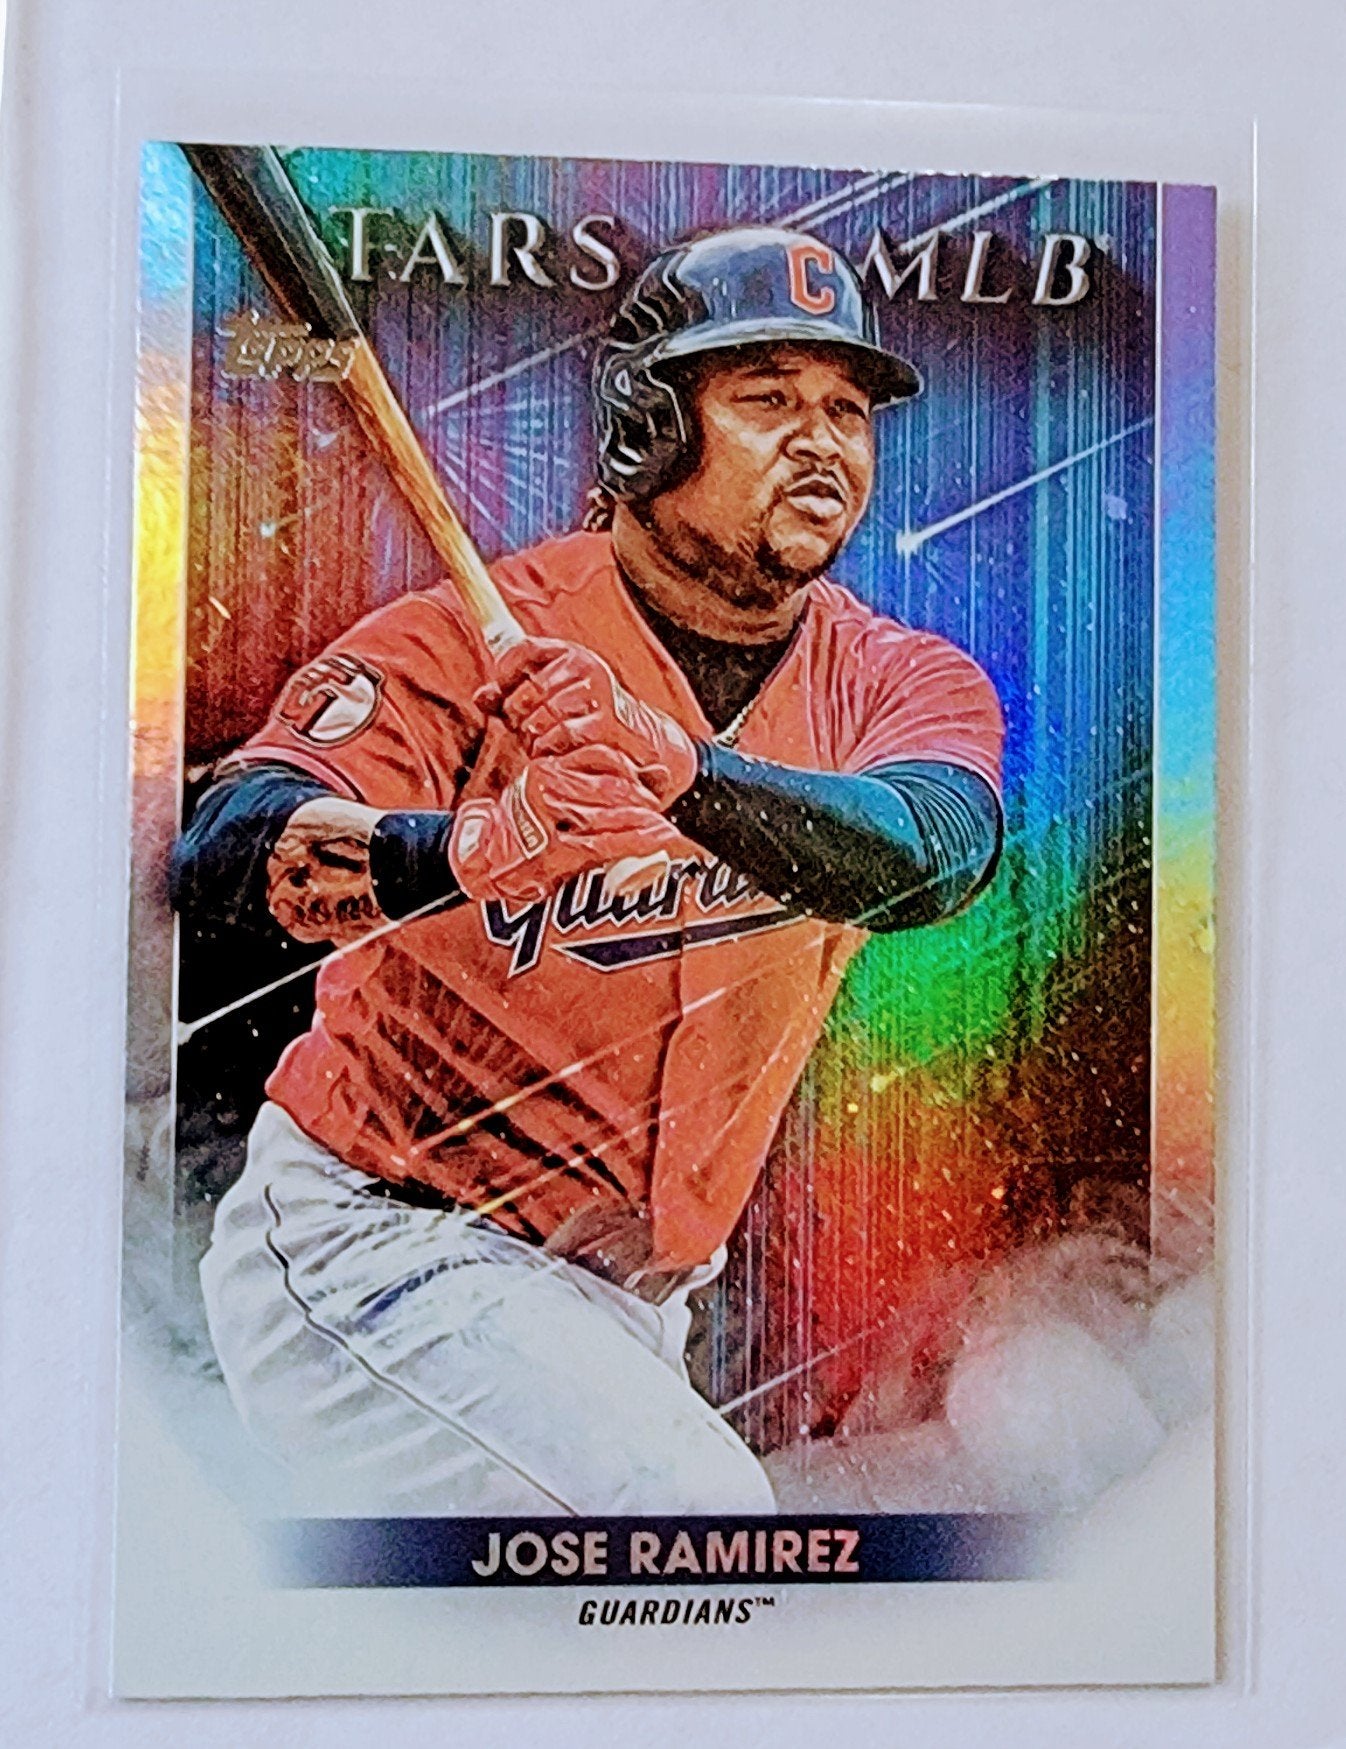 2022 Topps Jose Ramirez Stars of the MLB Foil Refractor Baseball Card AVM1 simple Xclusive Collectibles   